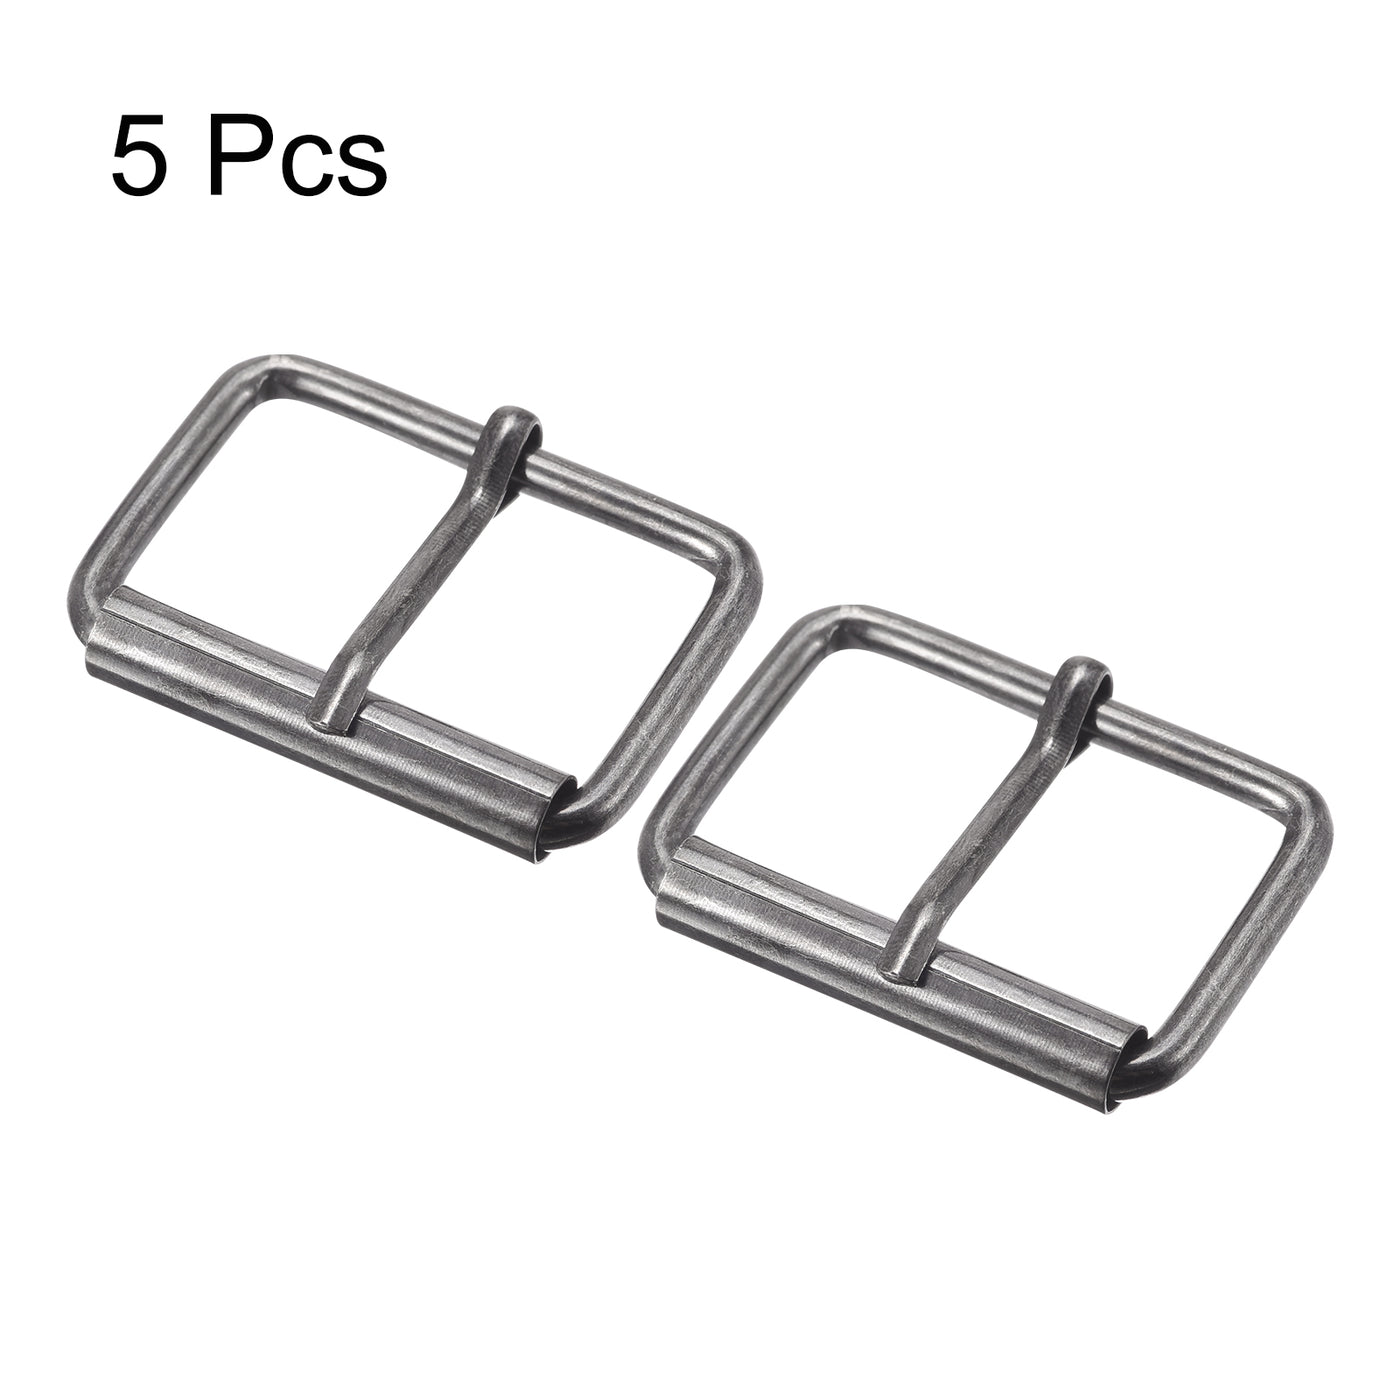 uxcell Uxcell 40mm(1.57") Metal Roller Buckles for Belts Bags Straps DIY Dark Gray 5pcs